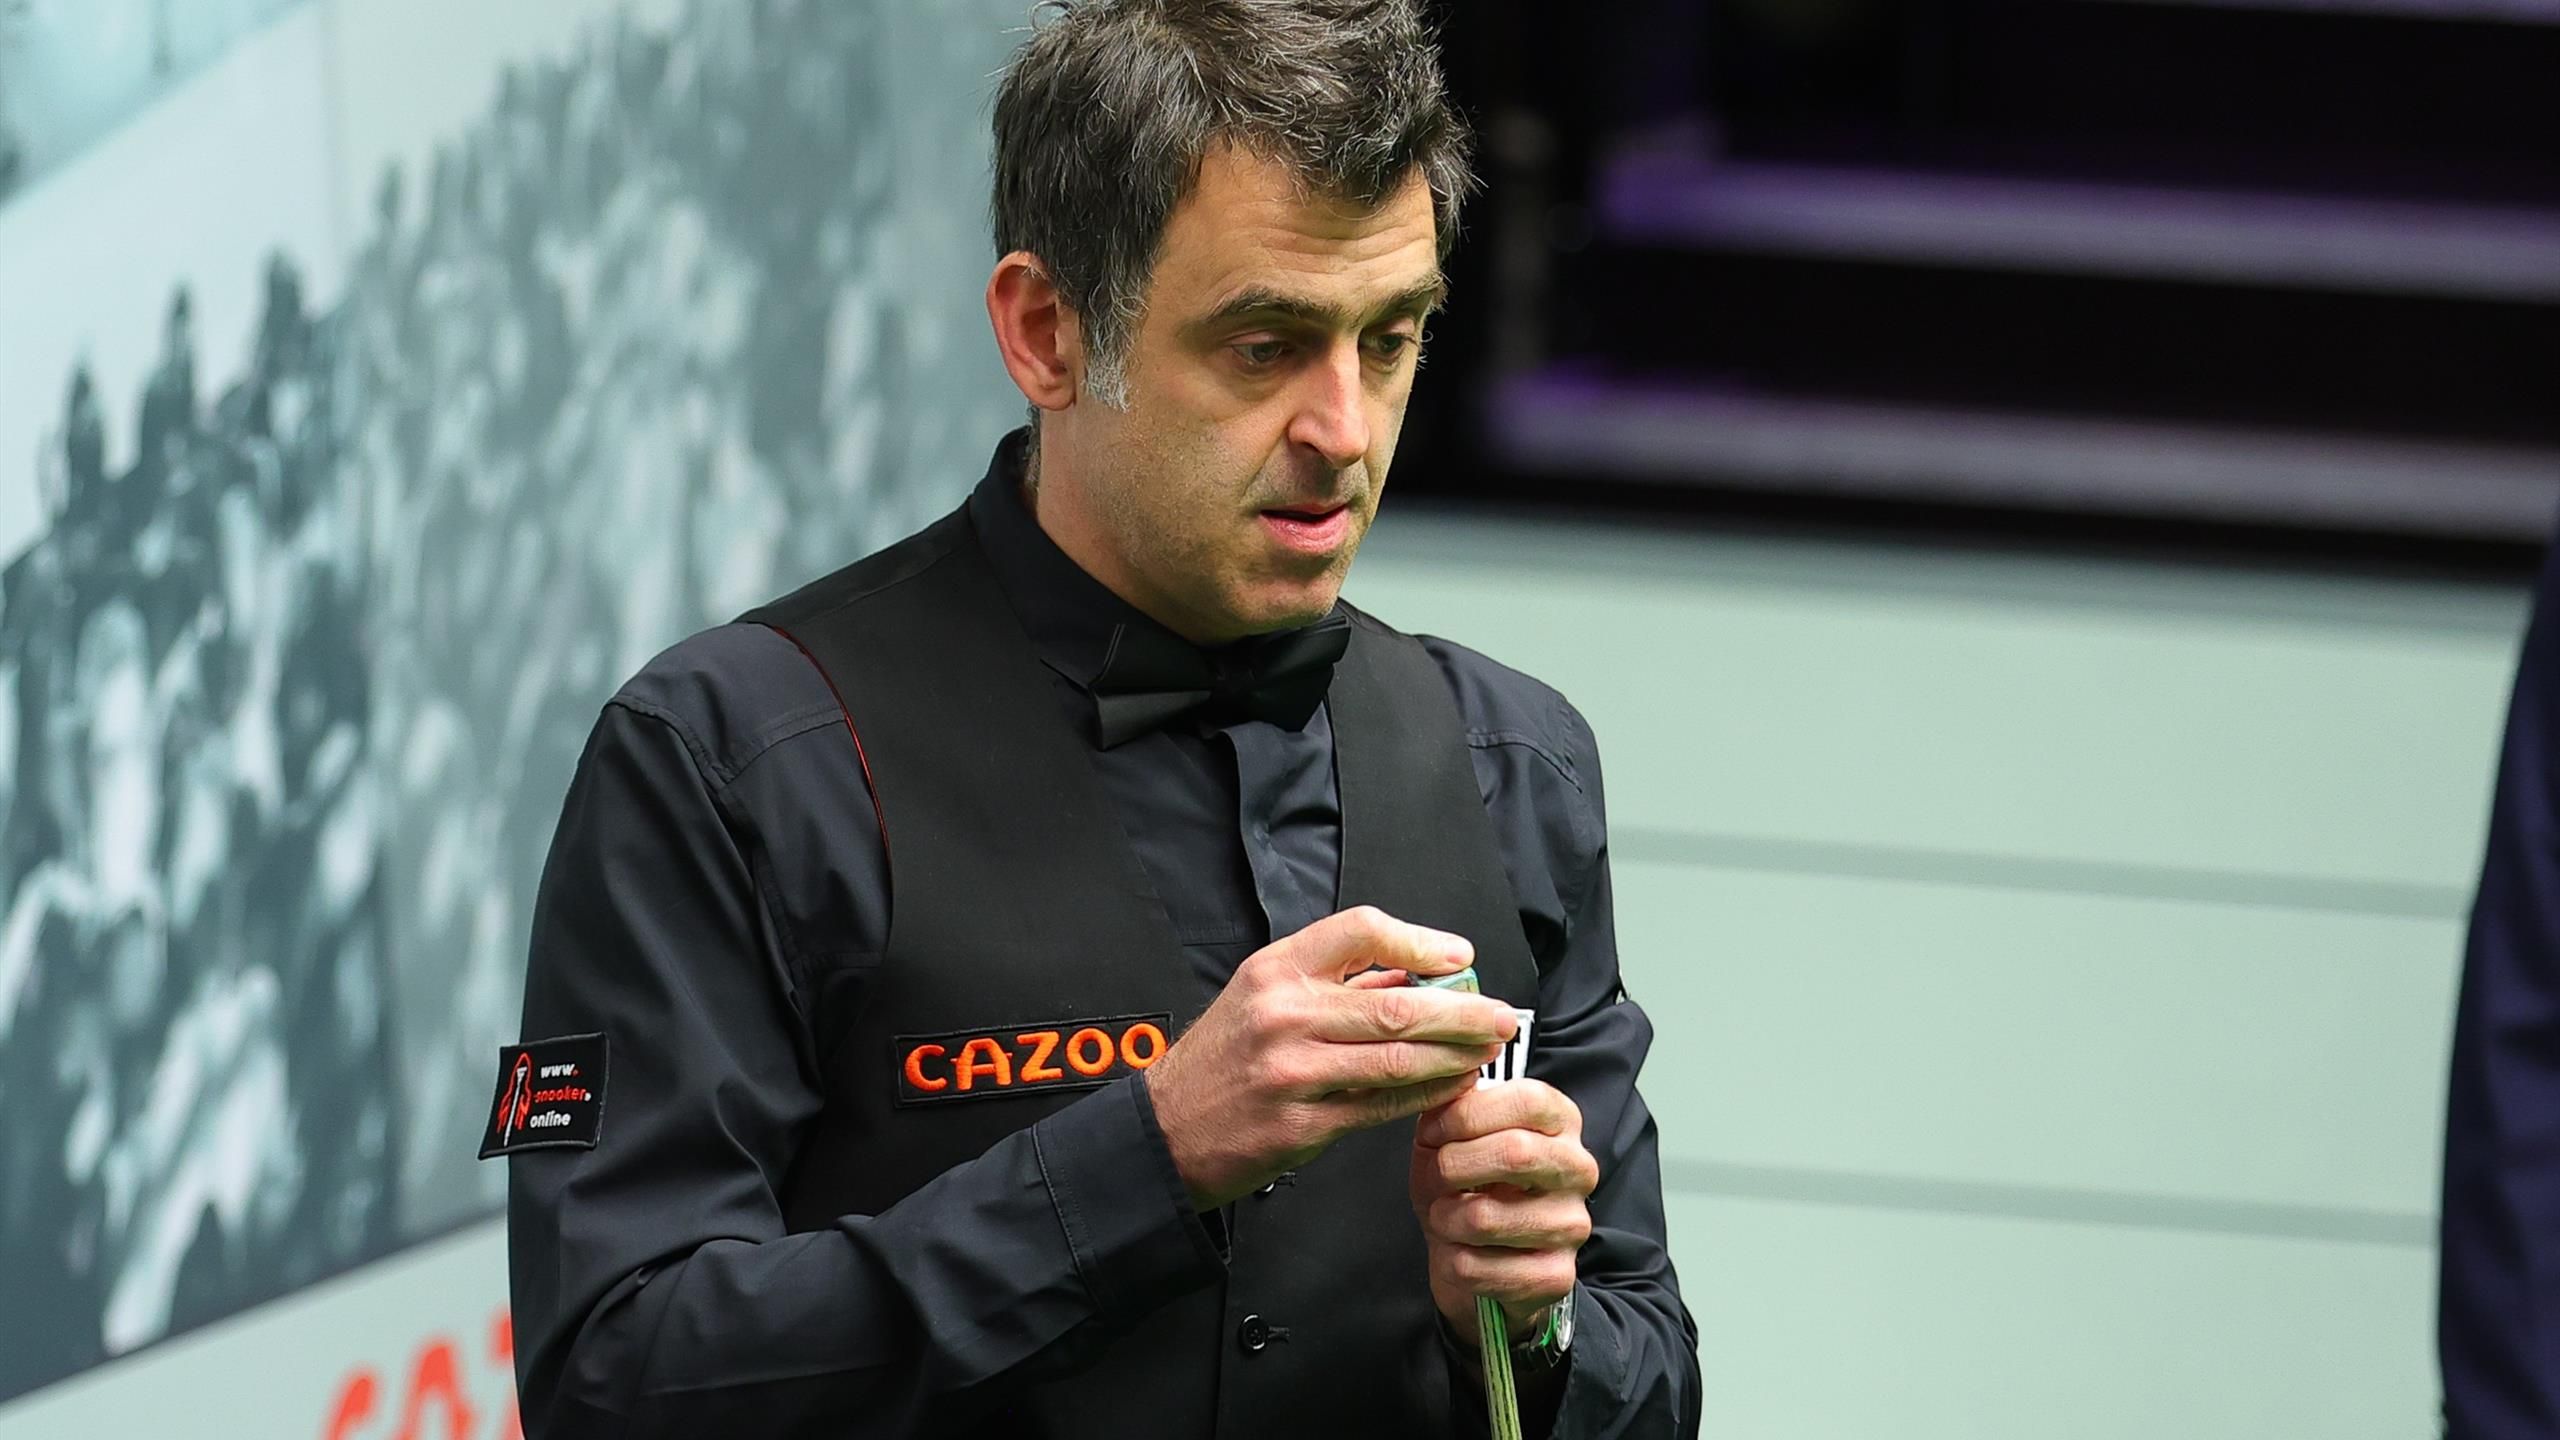 snooker results mark williams